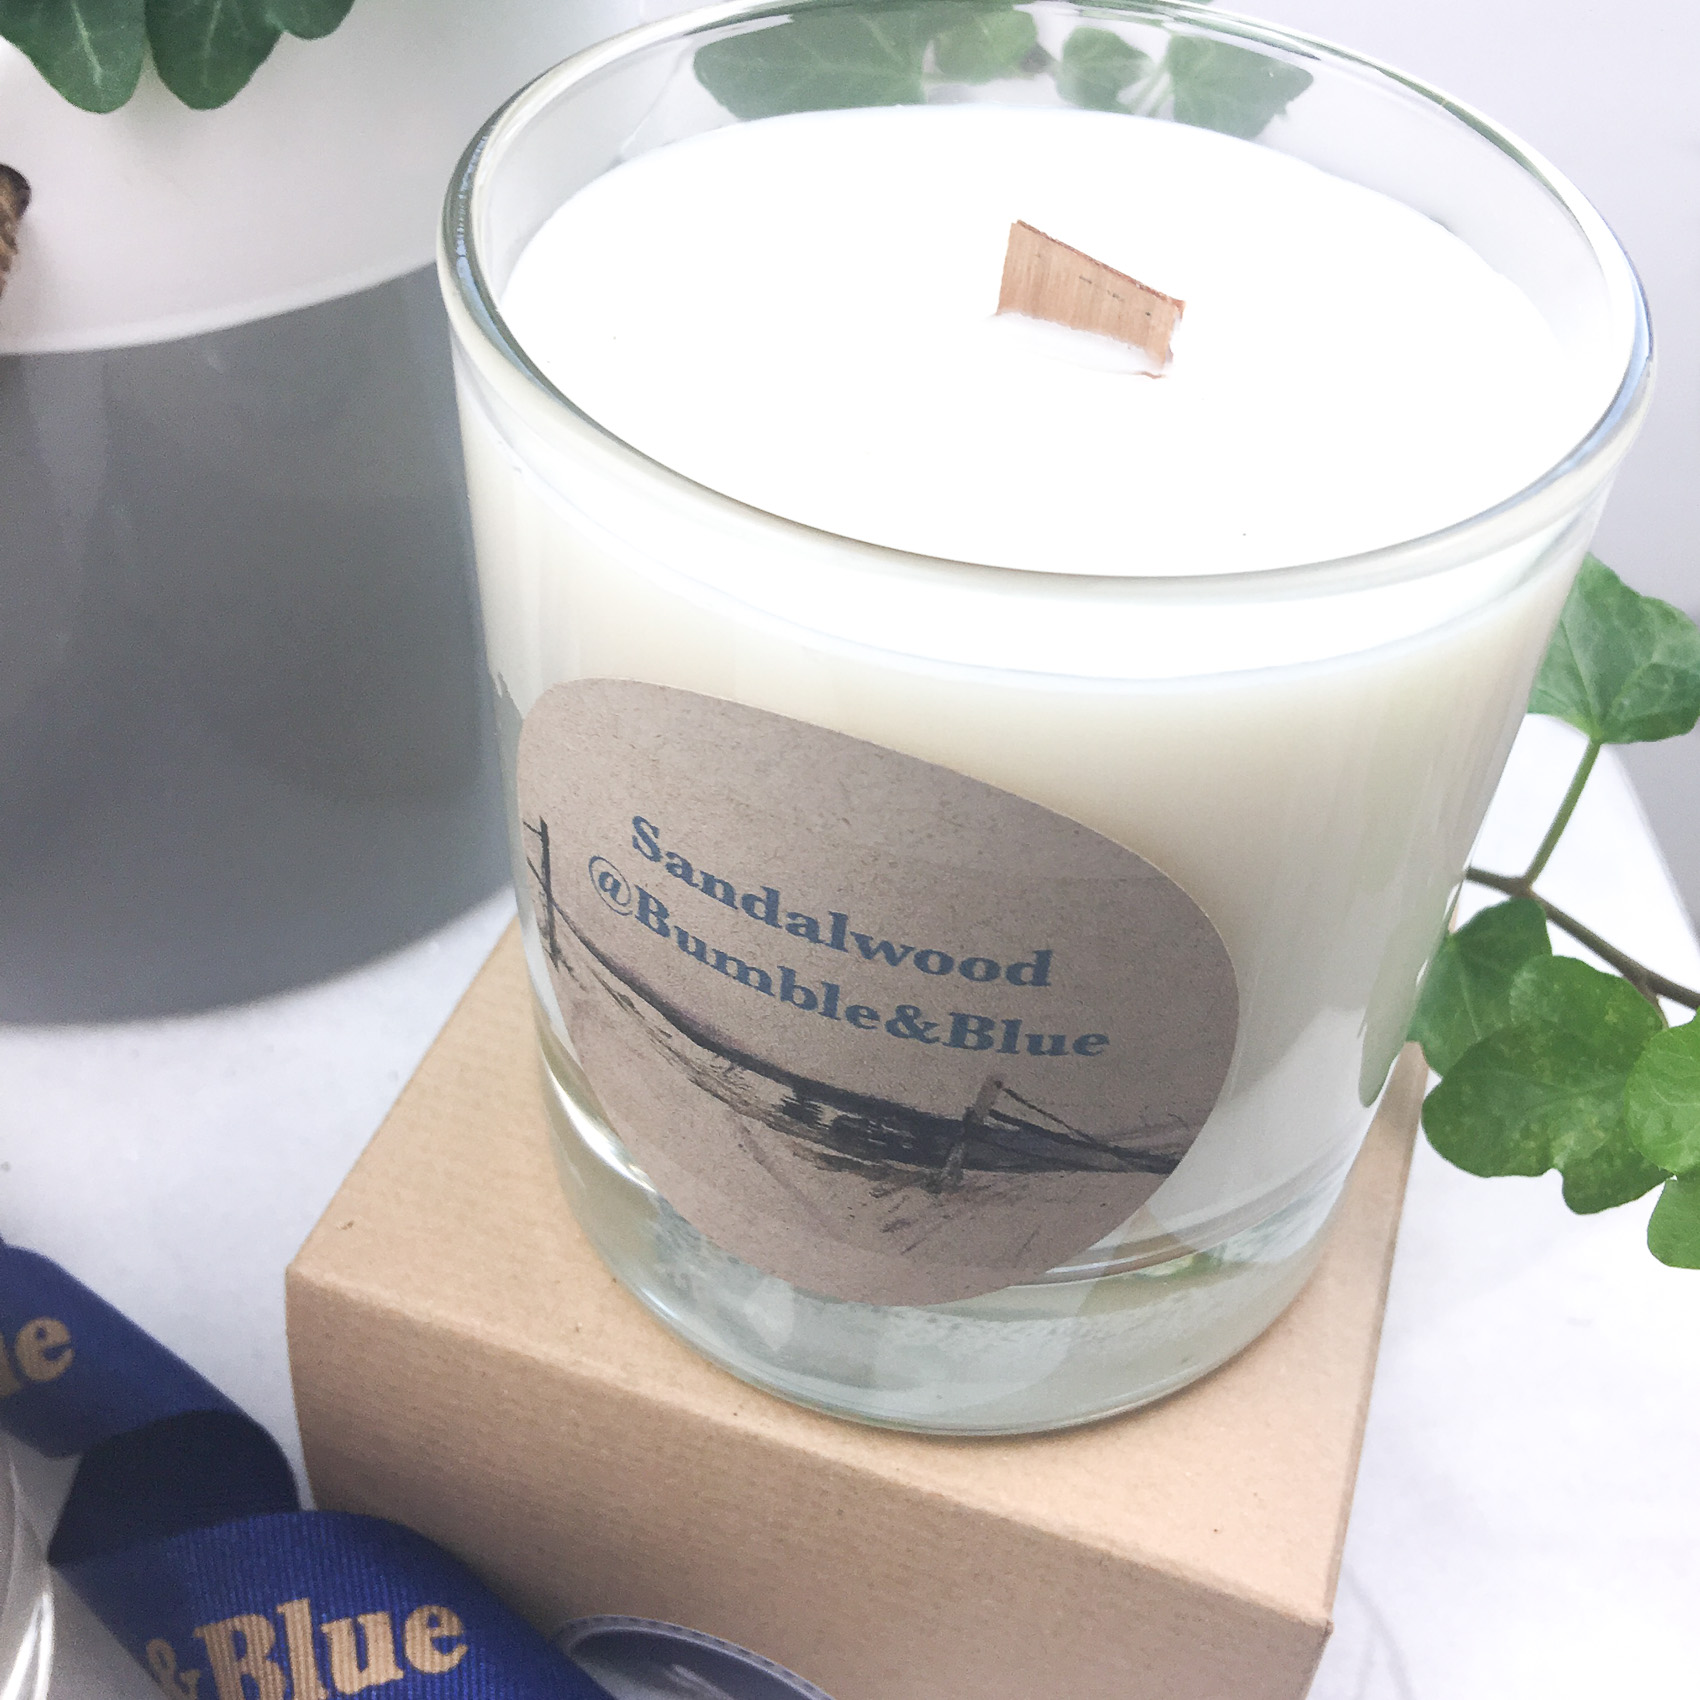 Bumble and Blue wooden wick candles - Sandalwood